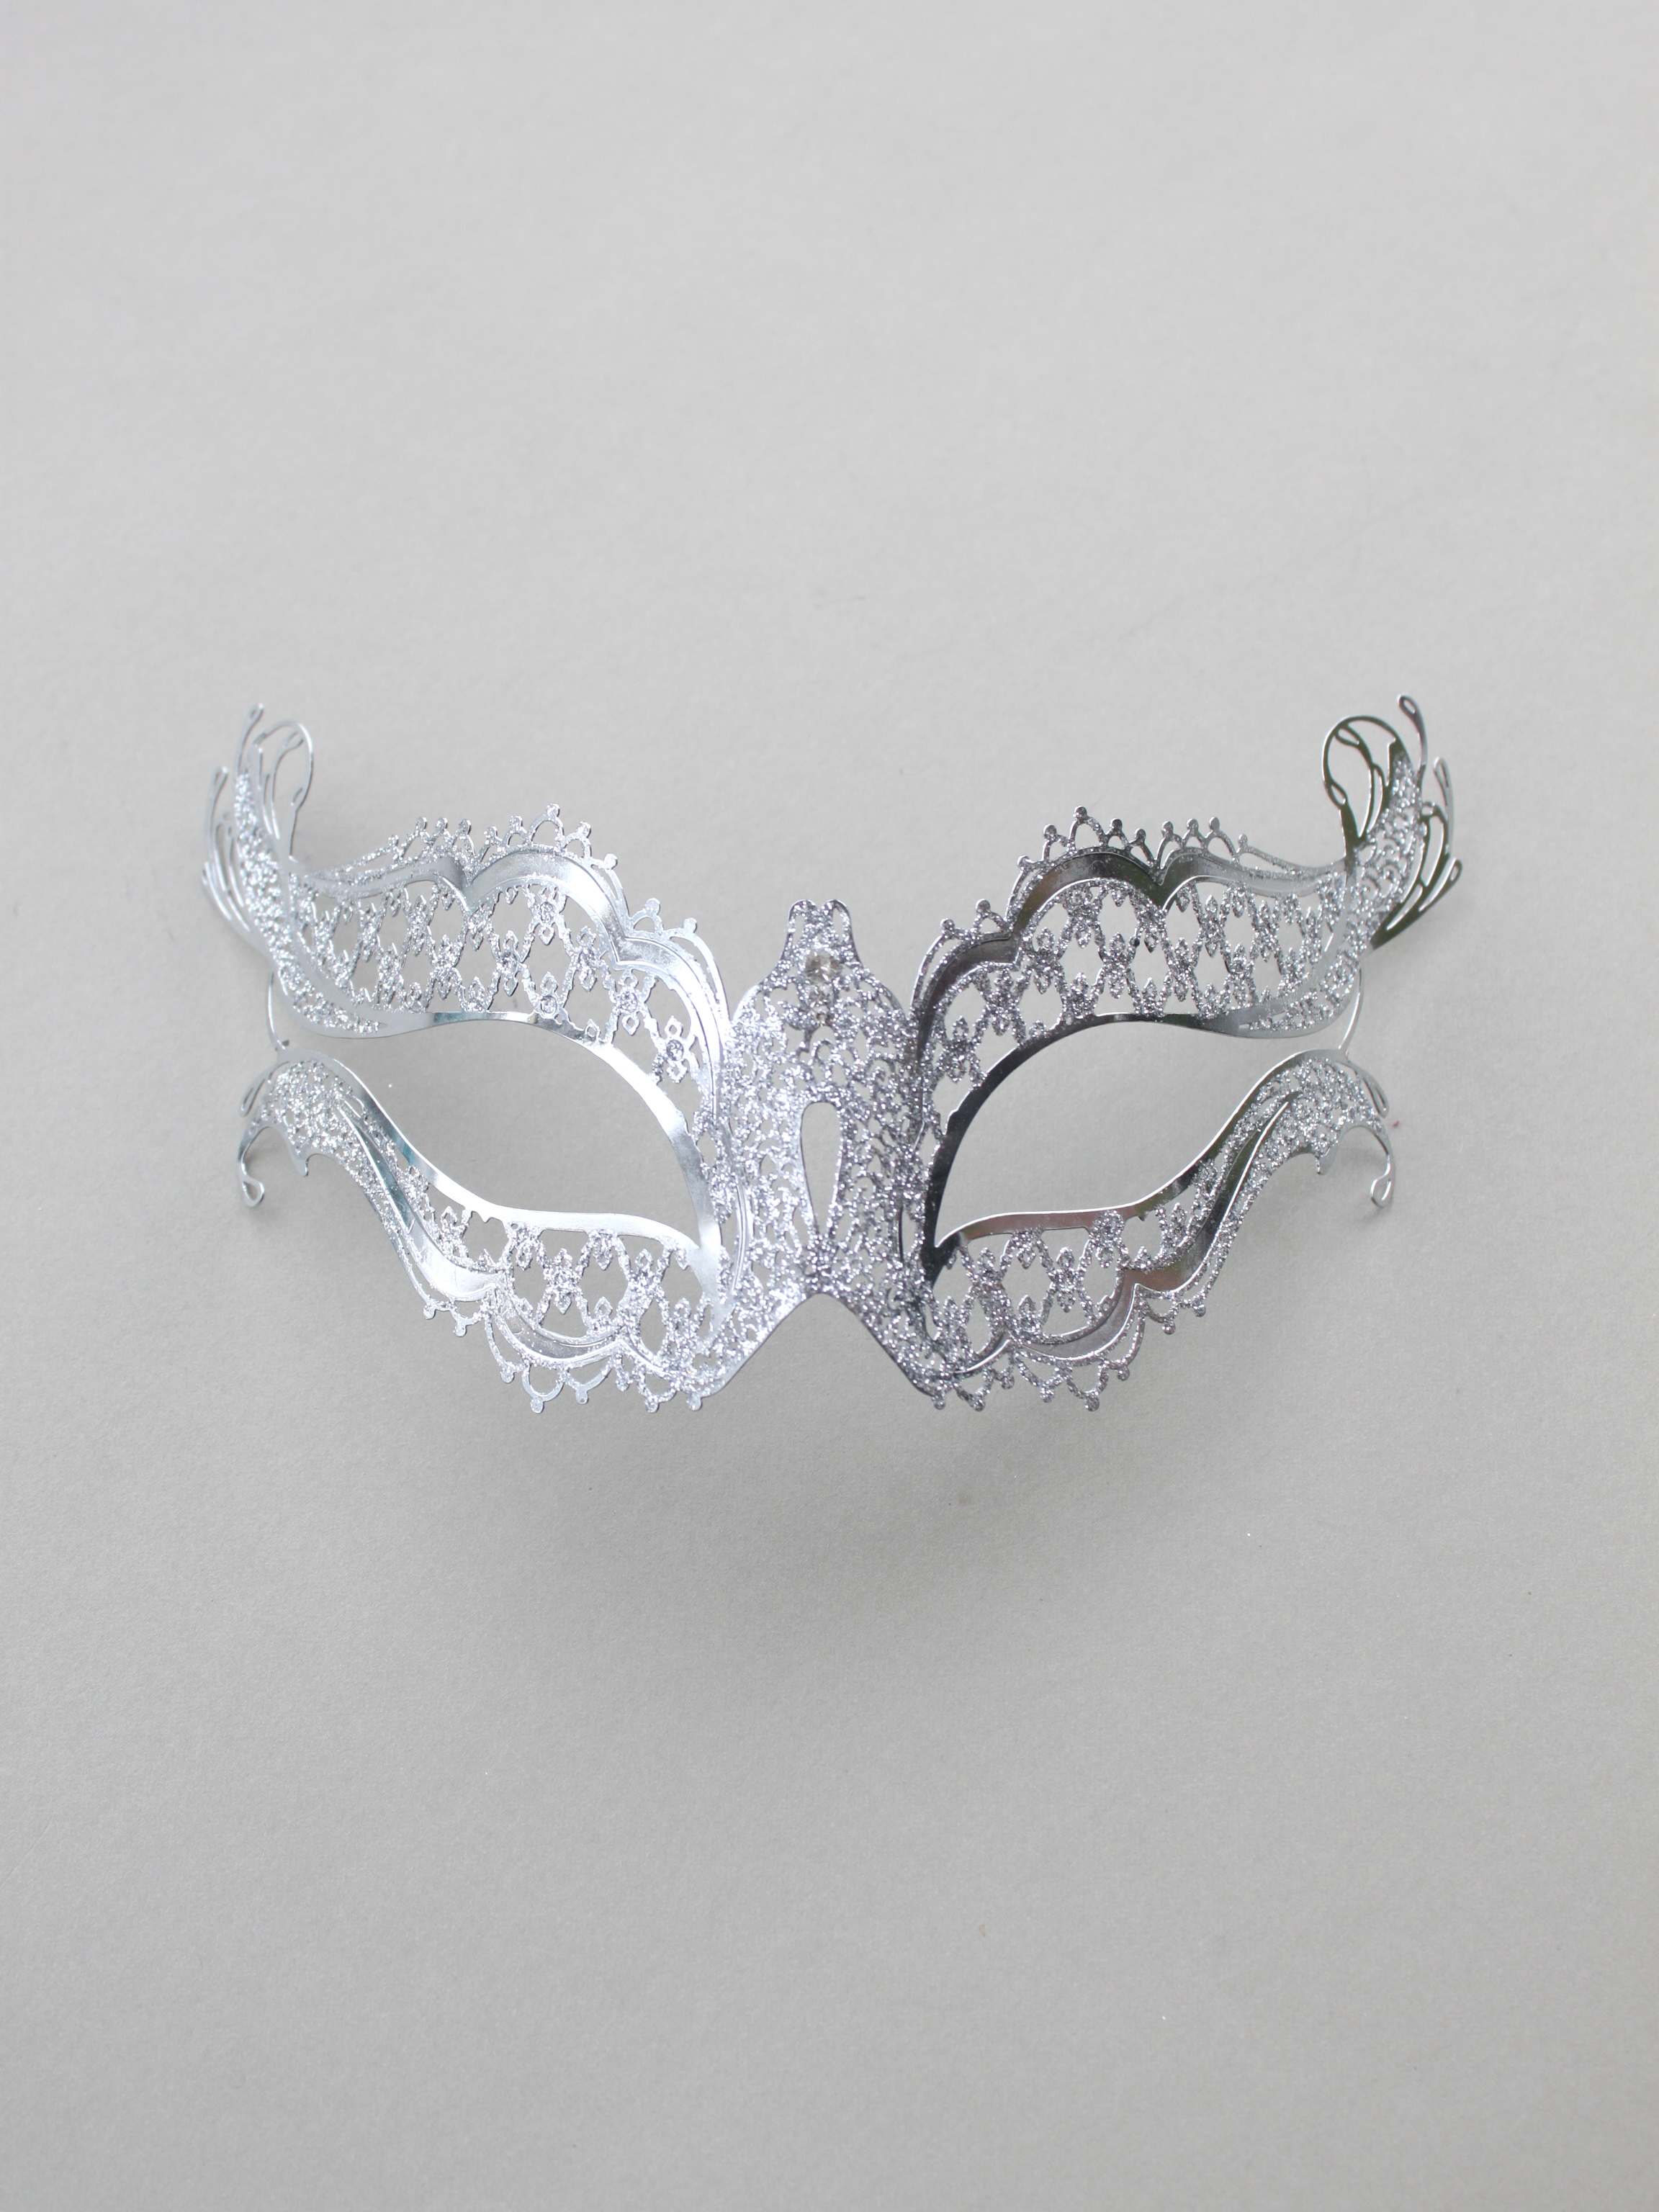 White Space Filigree Masquerade Mask With Clear Rhinestones